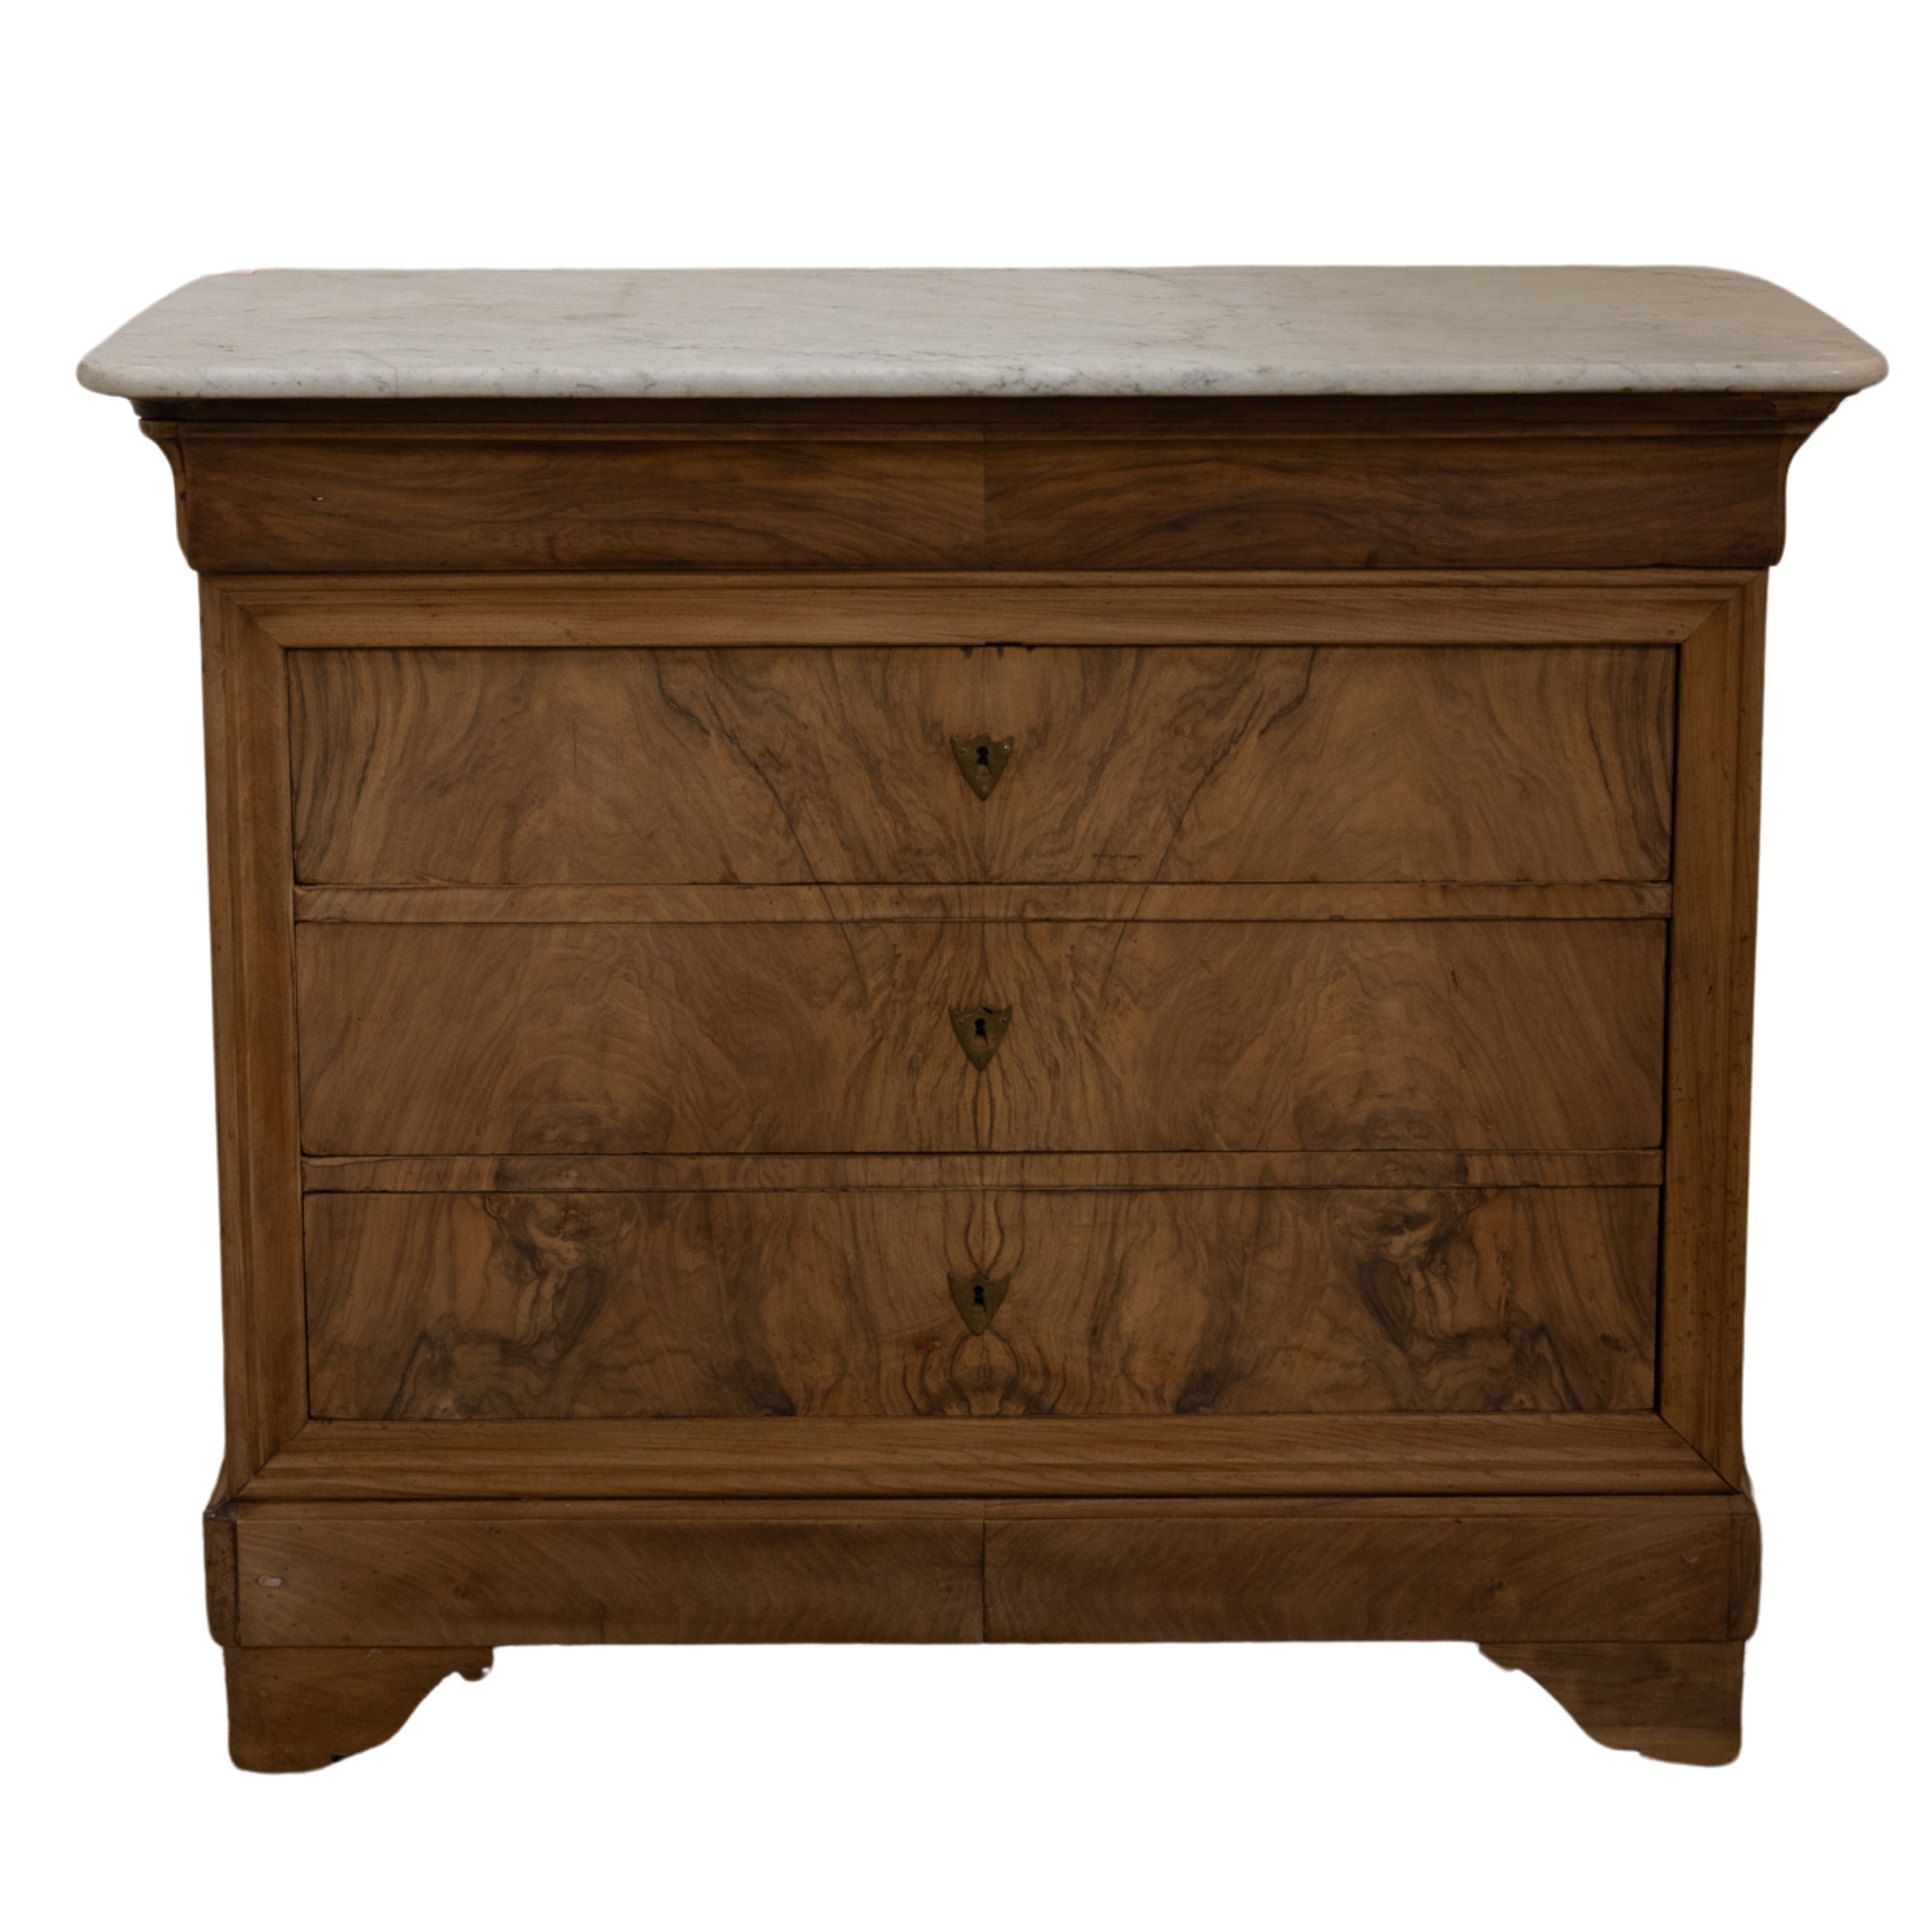 Light Burled Walnut Louis Philippe Commode with White Marble 46"L